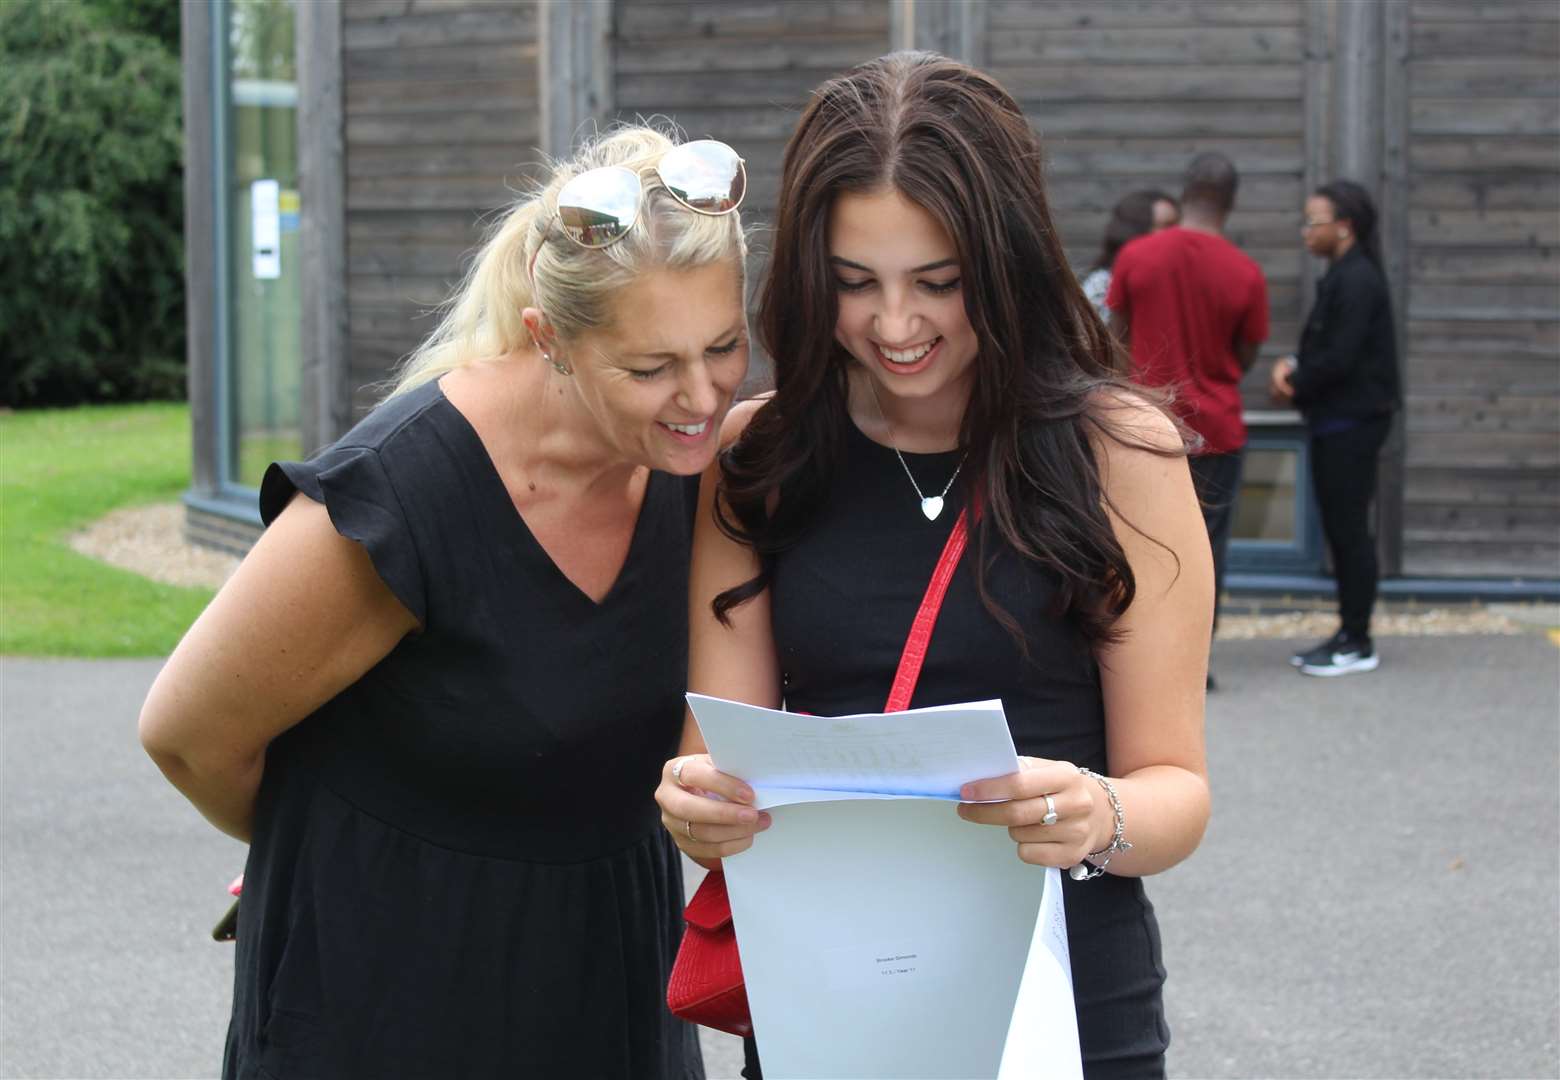 Brooke Simonds, 16, checking her GCSE results at Sittingbourne's Highsted Grammar School for Girls as her mum Allison looks on